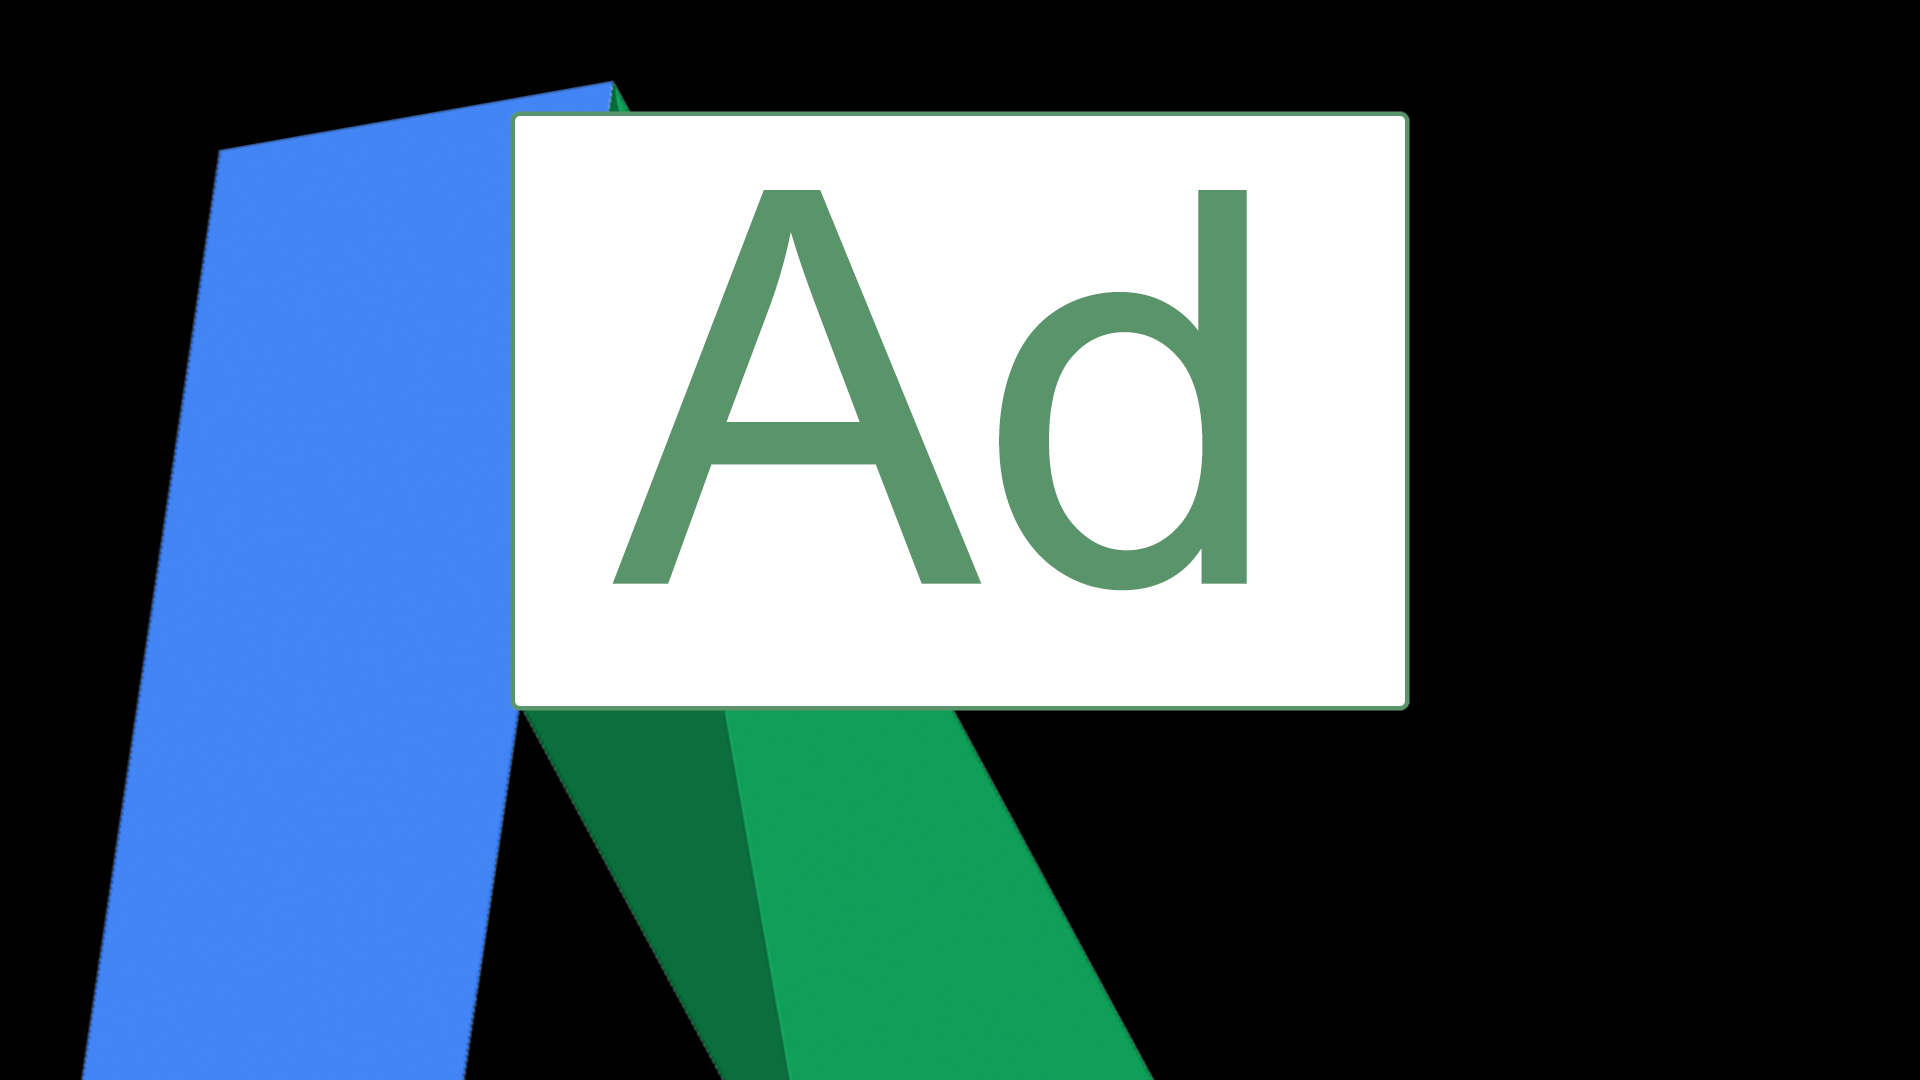 Green with White Outline Logo - Official: Google's green outlined 'Ad' label replacing solid green ...